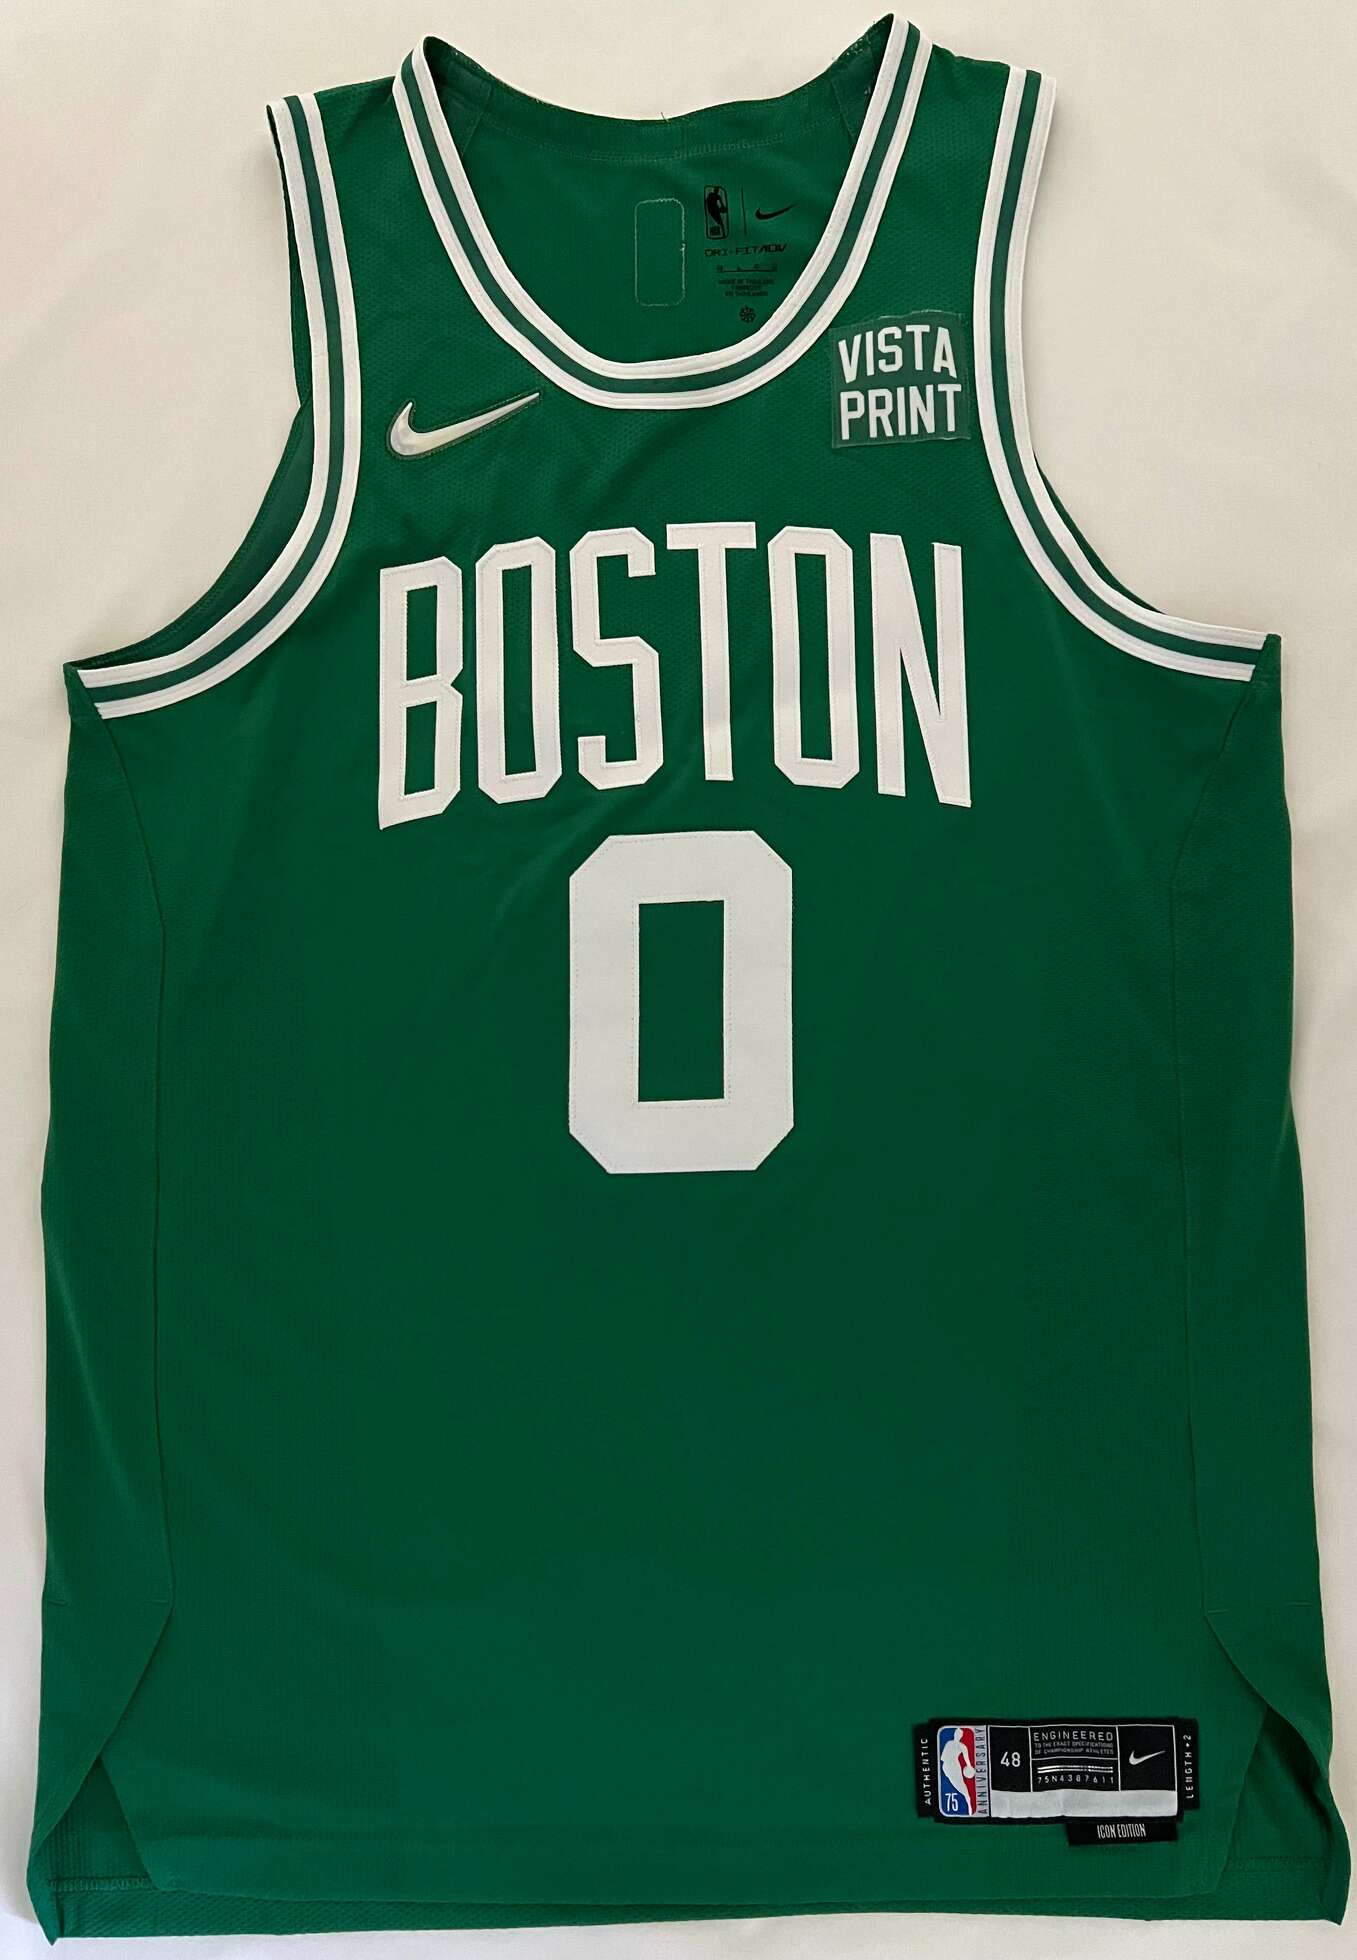 Celtics Experience - (2) Court-Side Tickets plus team-signed Basketball & Jersey signed by Jayson Tatum  - image 6